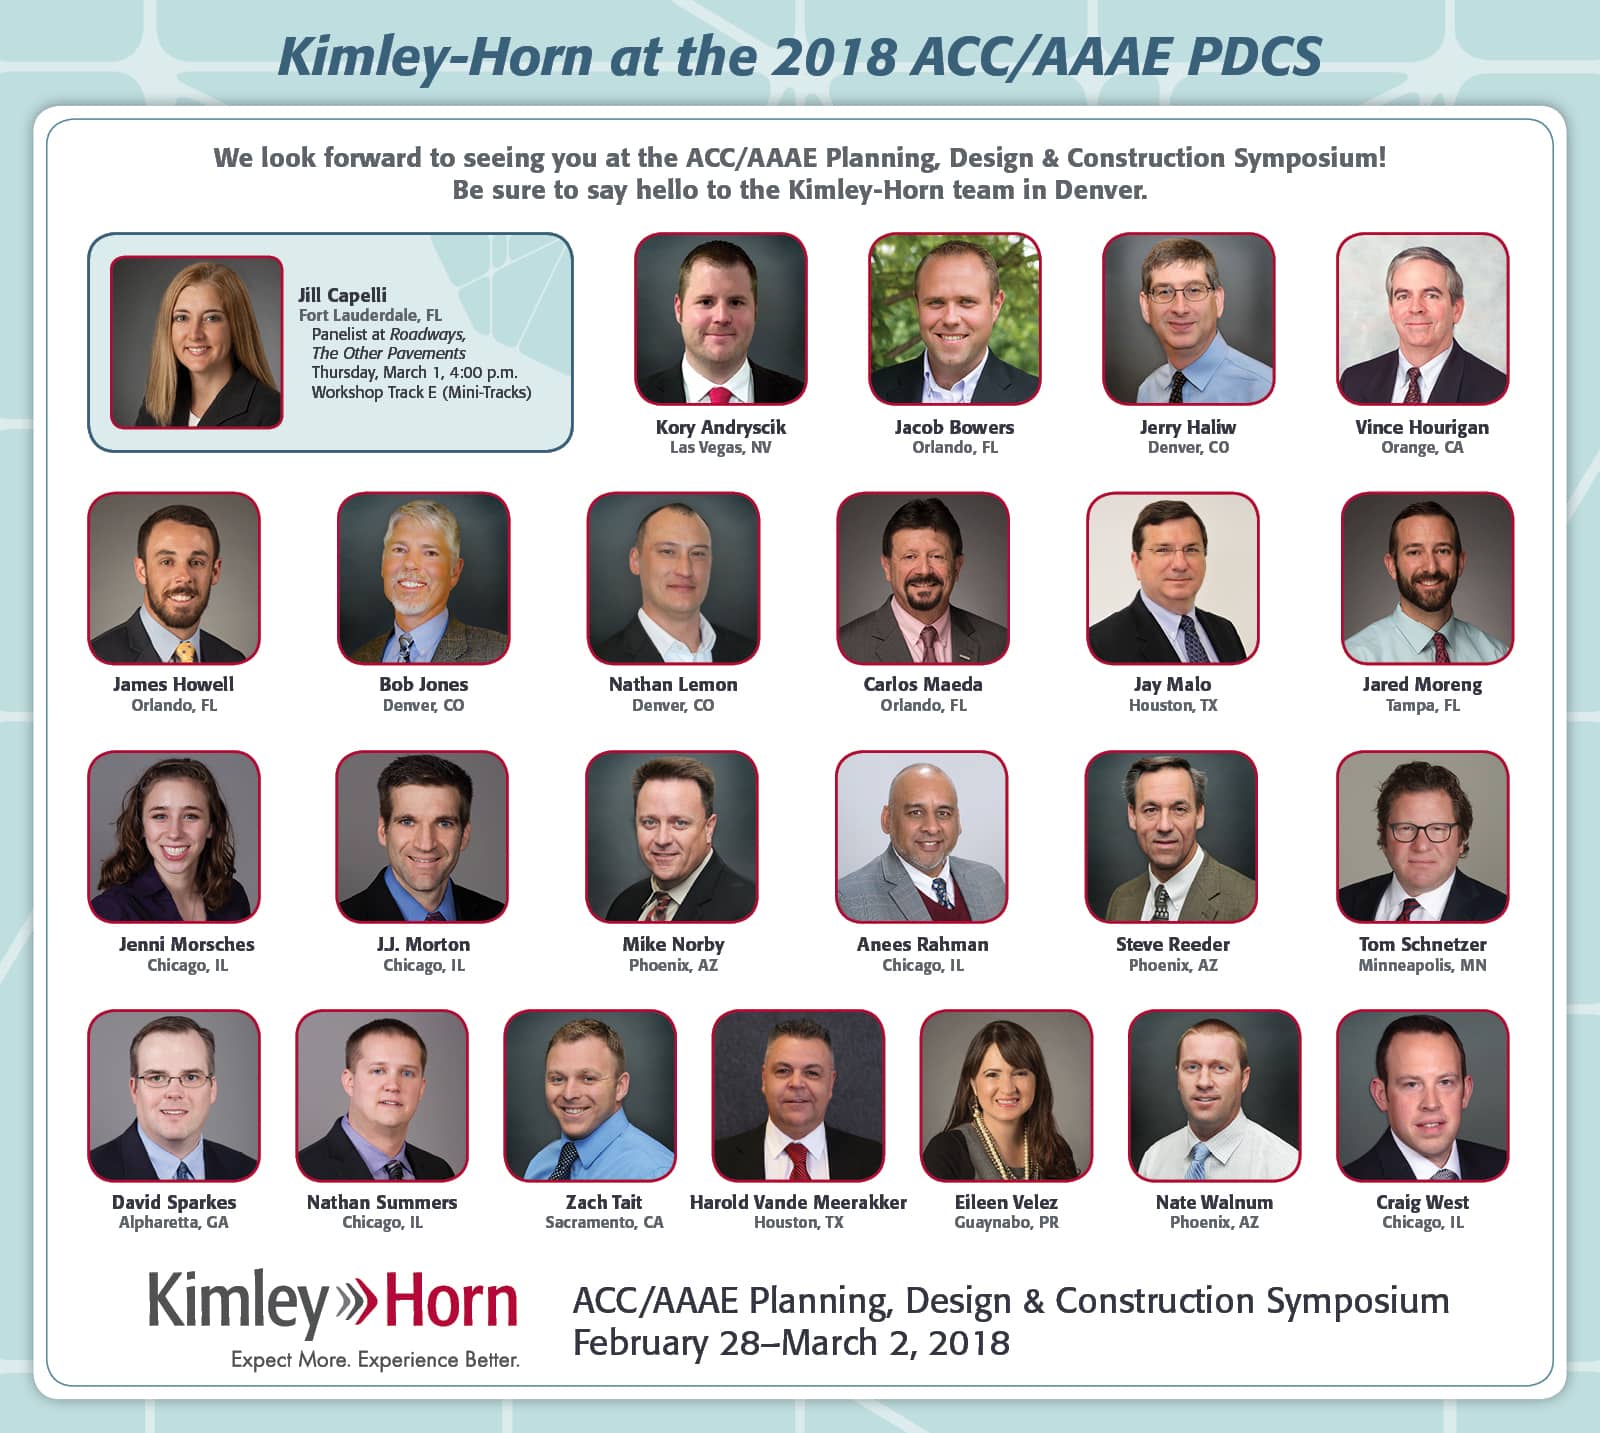 Kimley-Horn at the 2018 ACC-AAAE Plan, Design & Construction Symposium